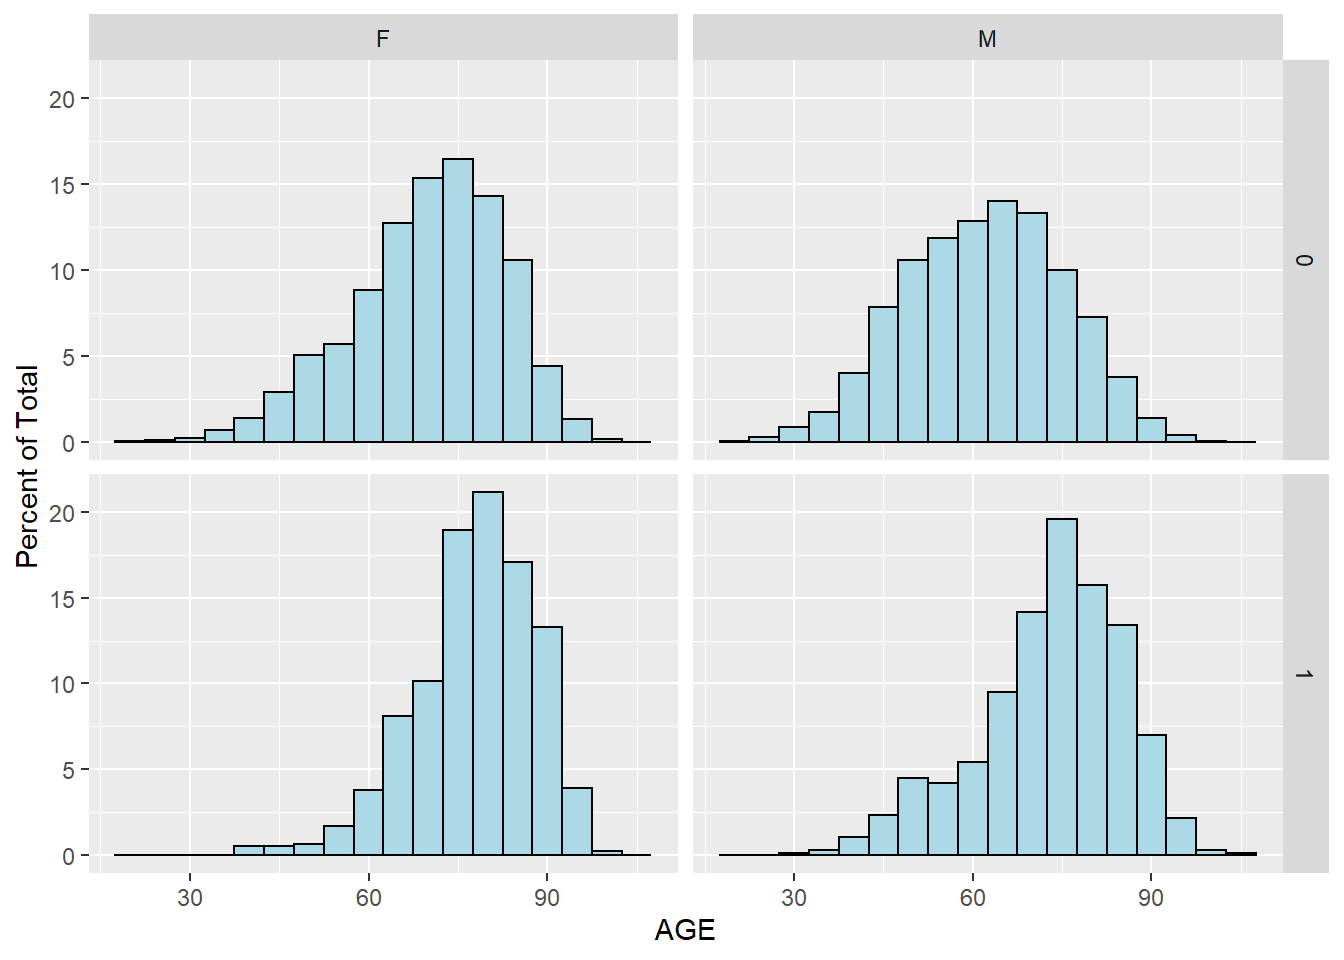 Histogram of AGE by SEX and DIED using ggplot2 package